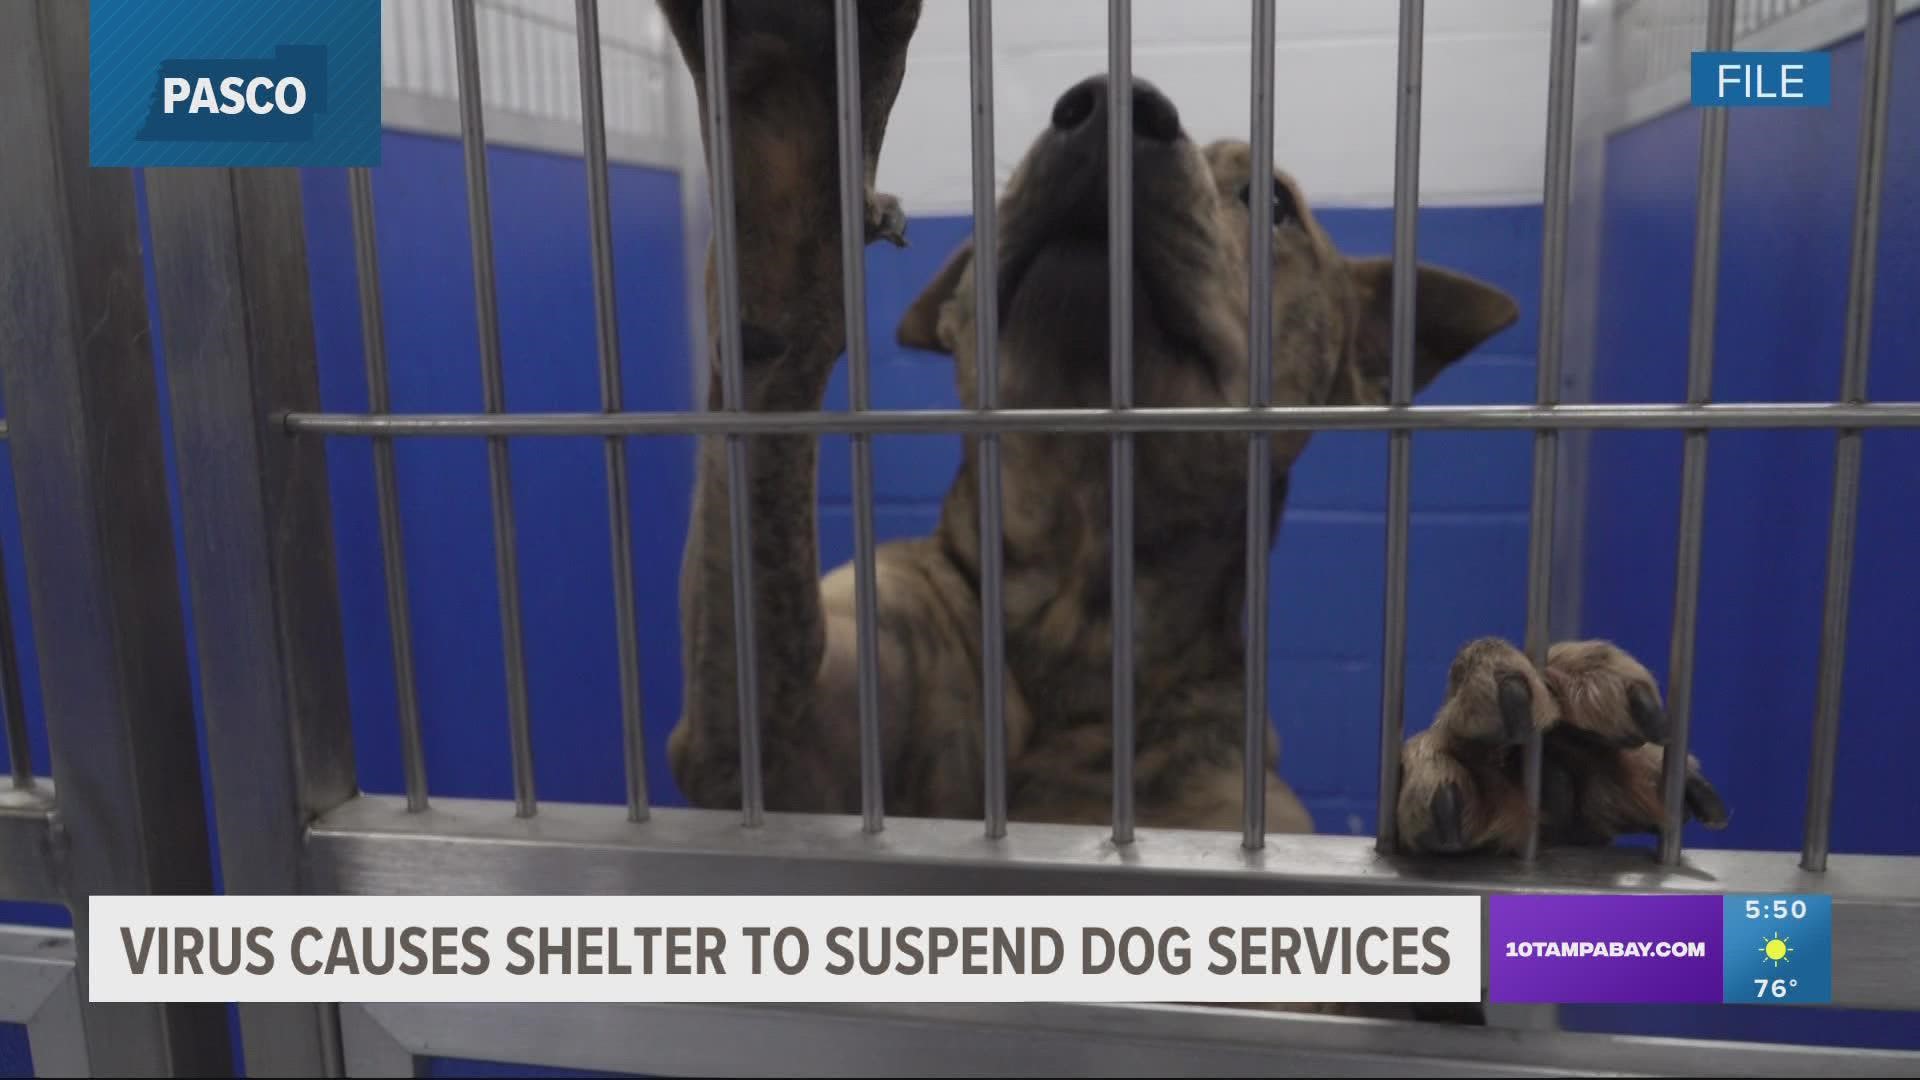 The shelter is expected to resume operations in about two weeks or when veterinarians determine the environment is safe for pets.